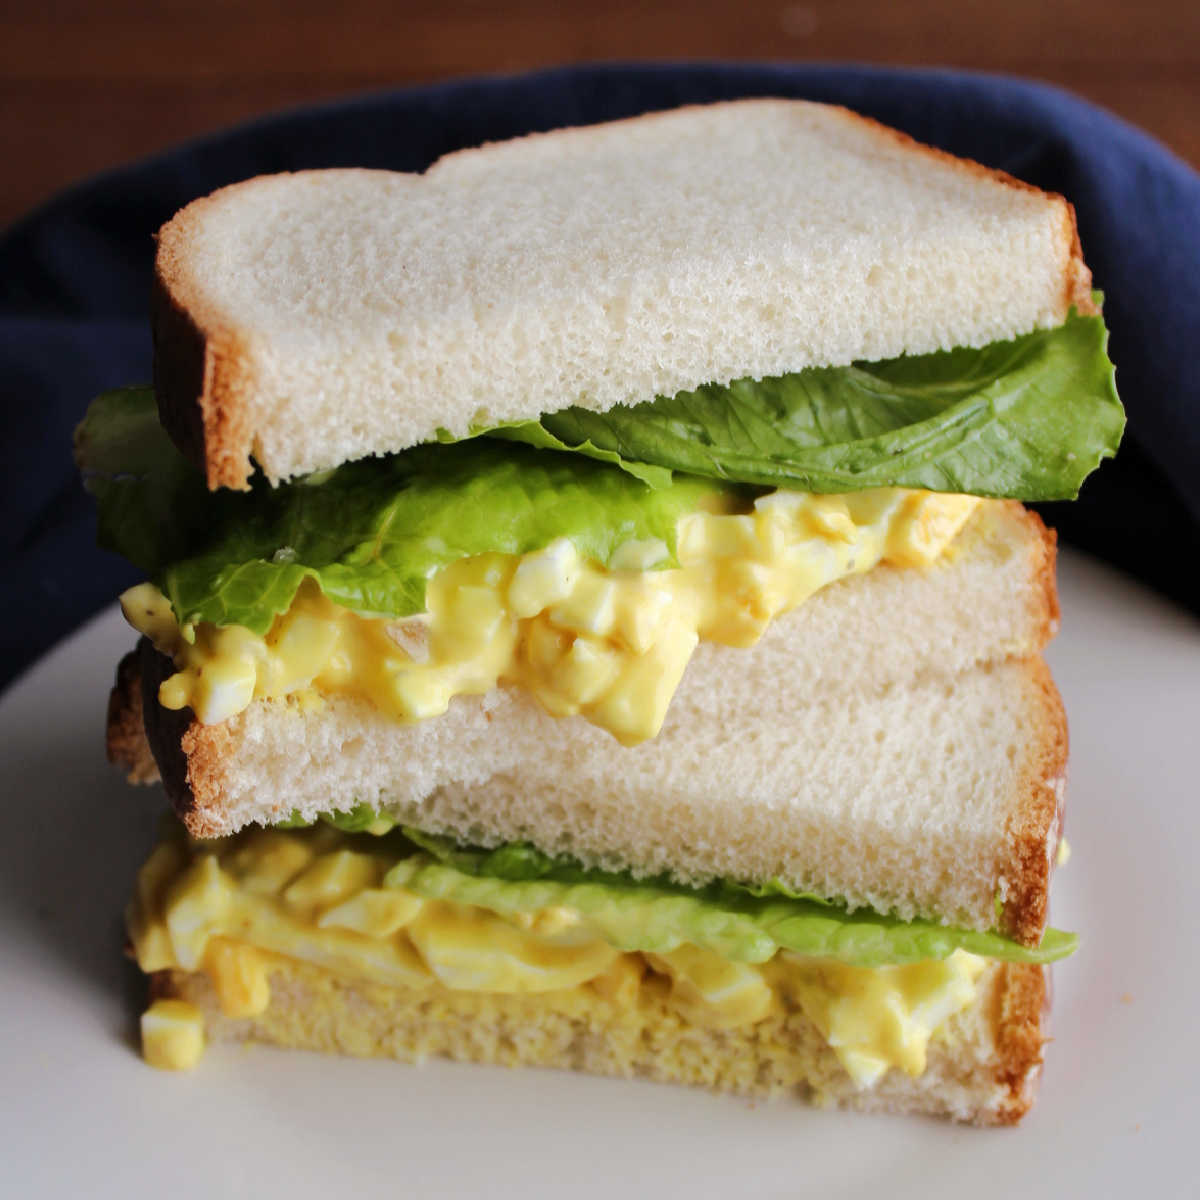 Egg salad sandwich with white bread, chunky yellow egg salad, and lettuce cut in half and stacked.